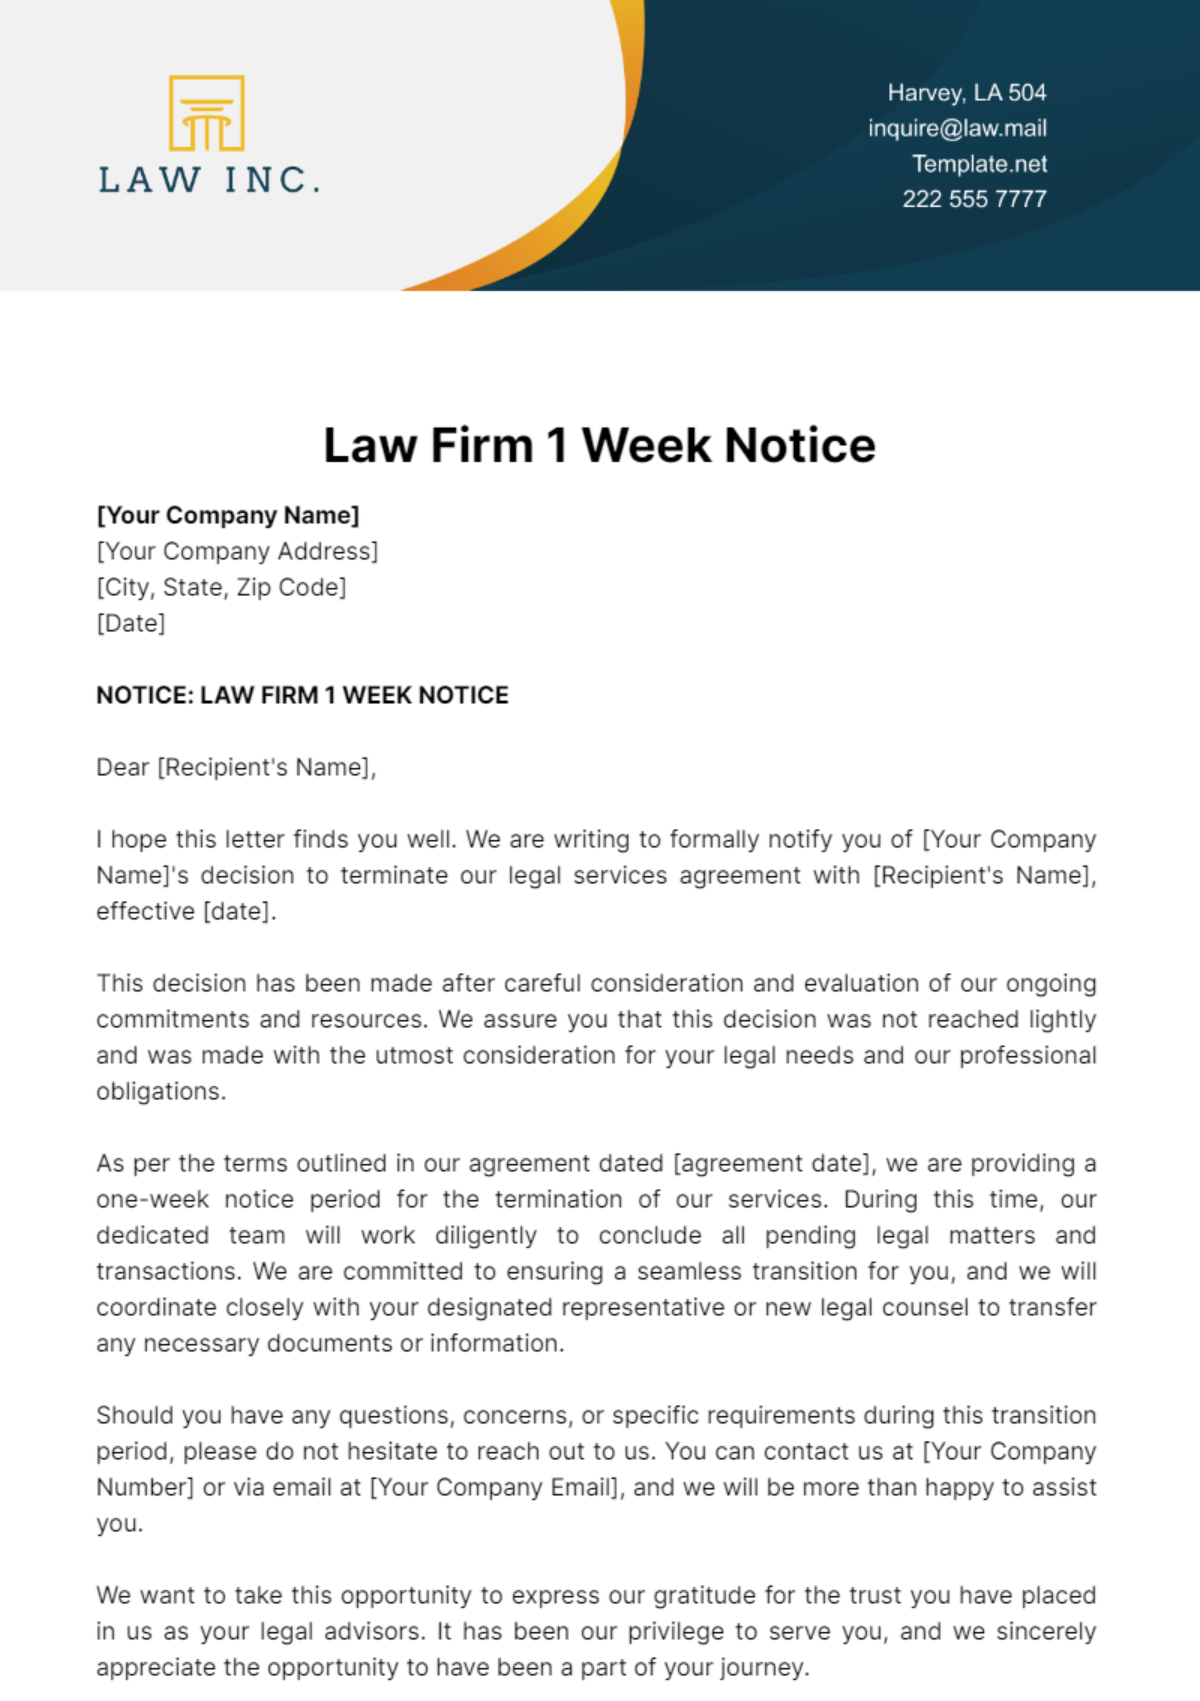 Law Firm 1 Week Notice Template